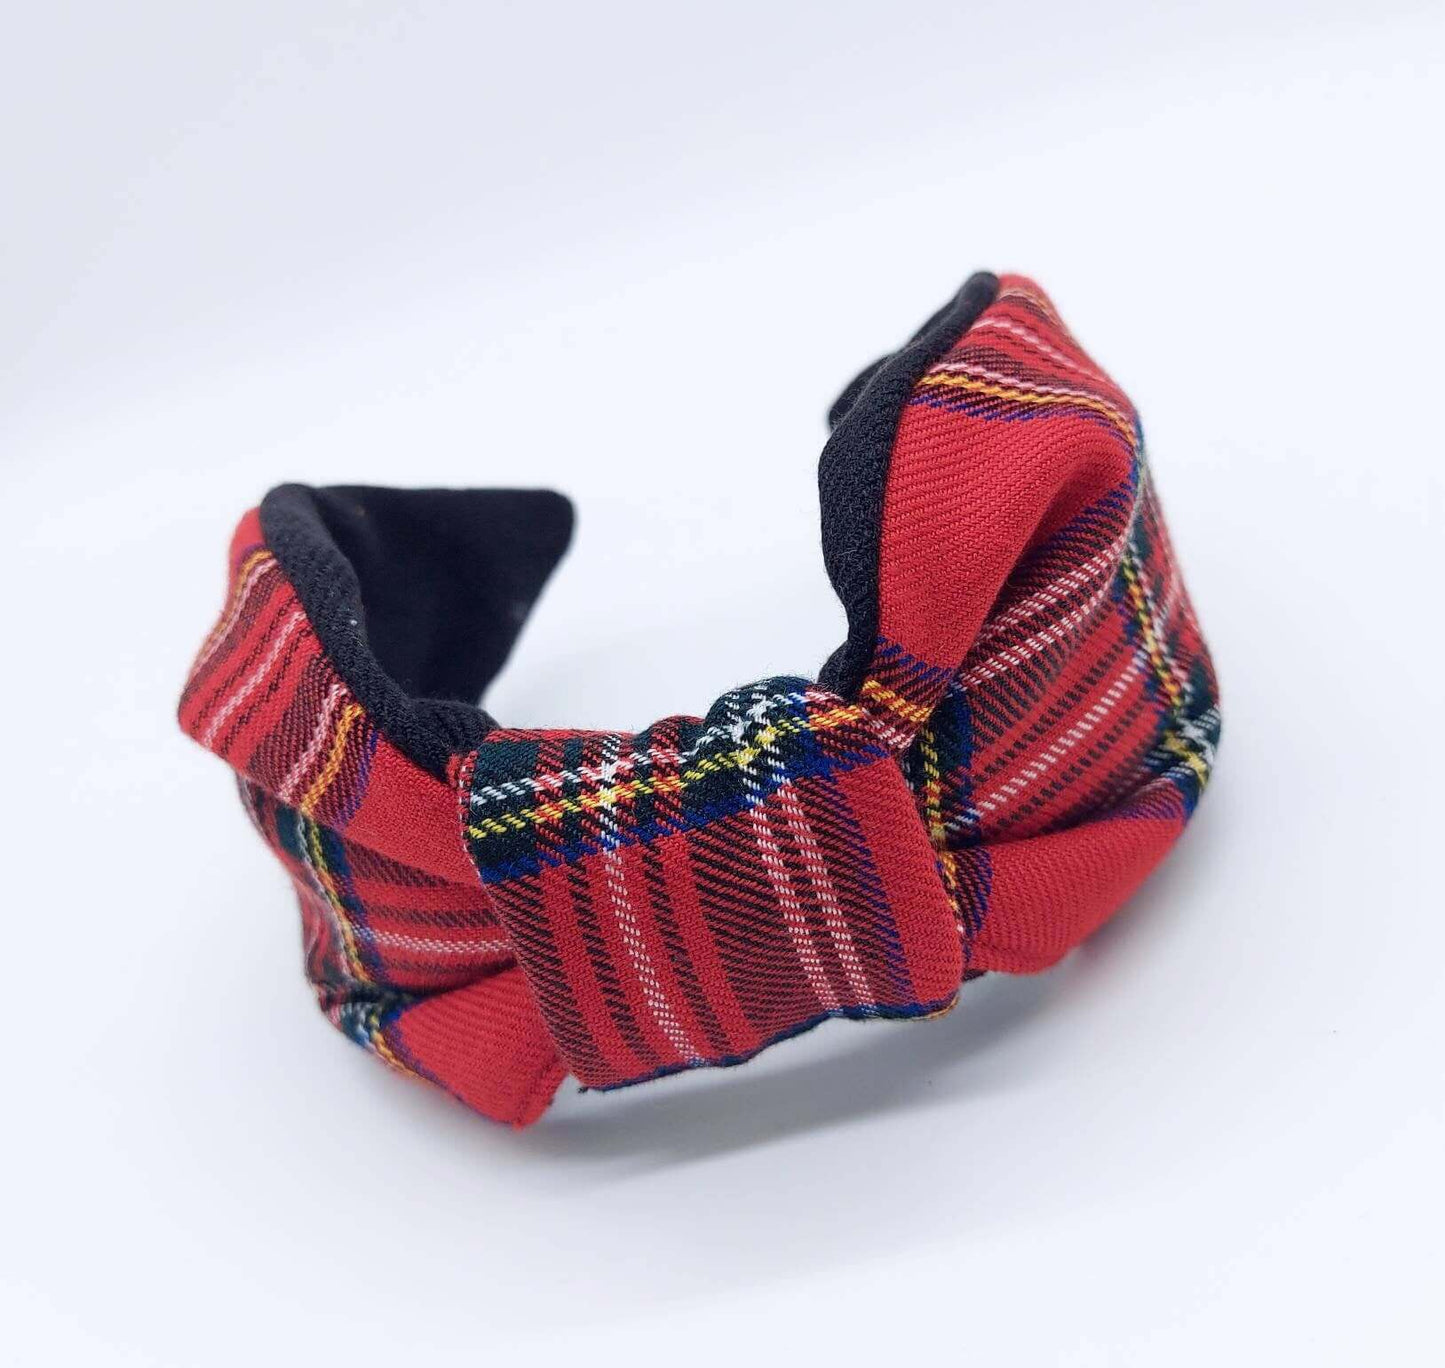 A bow-style, black and red tartan paid fabric knot headband with plain black lining underneath.